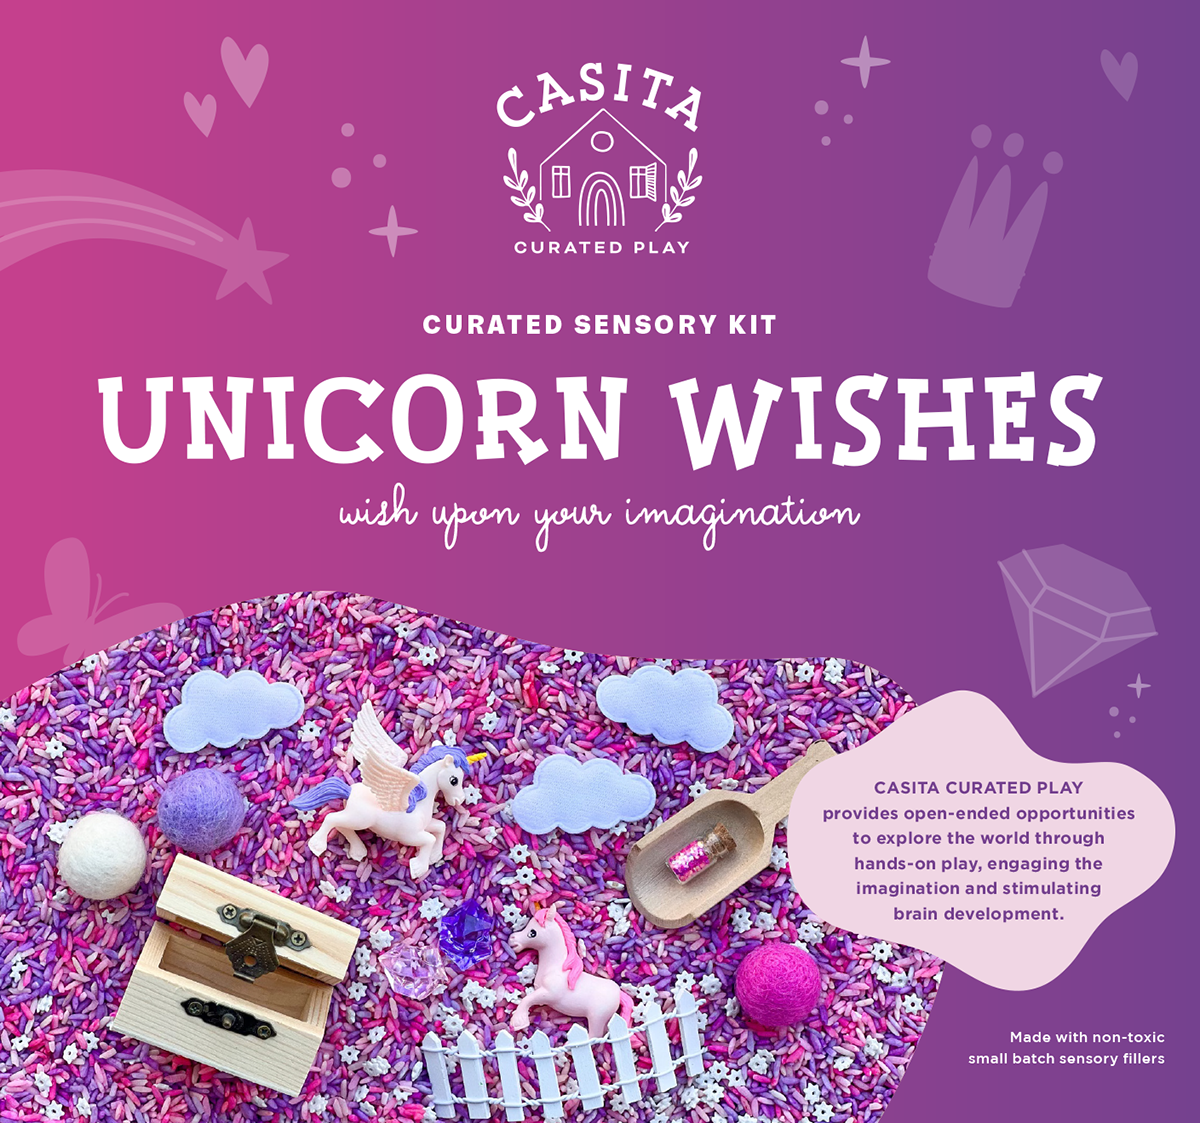 Wish upon your imagination & play in fantasy. Includes two unicorns, plush clouds, fuzzy felt balls & gemstones. Sprinkle & scoop using the miniature glitter jar. Mini wooden wishing chest & picket fence. Filler is dried rice with food color.